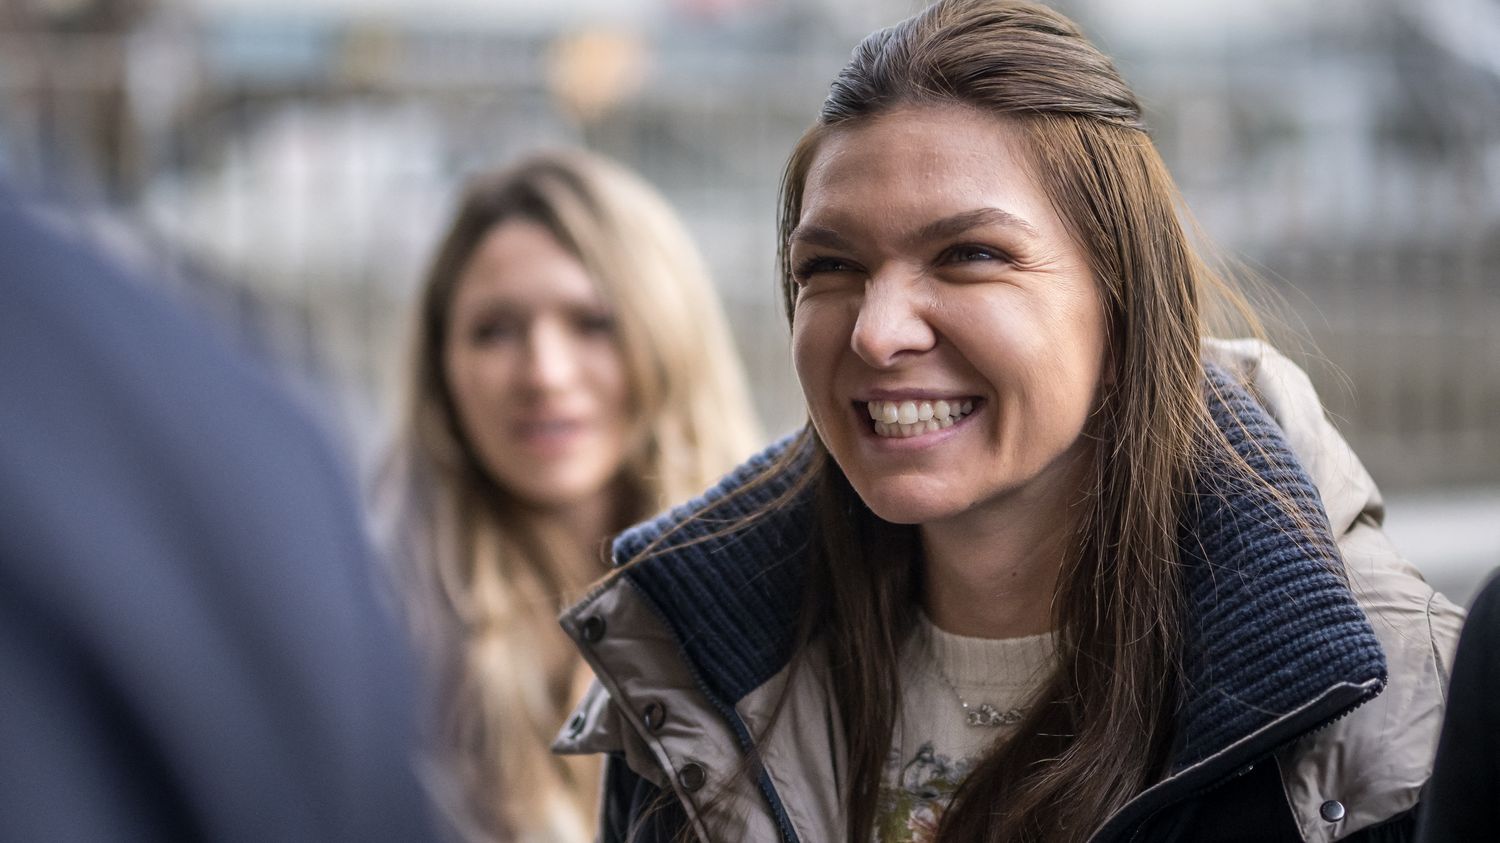 Tennis: the suspension of the former tennis player of the world Simona Halep reduced to nine months, the Romanian has already served